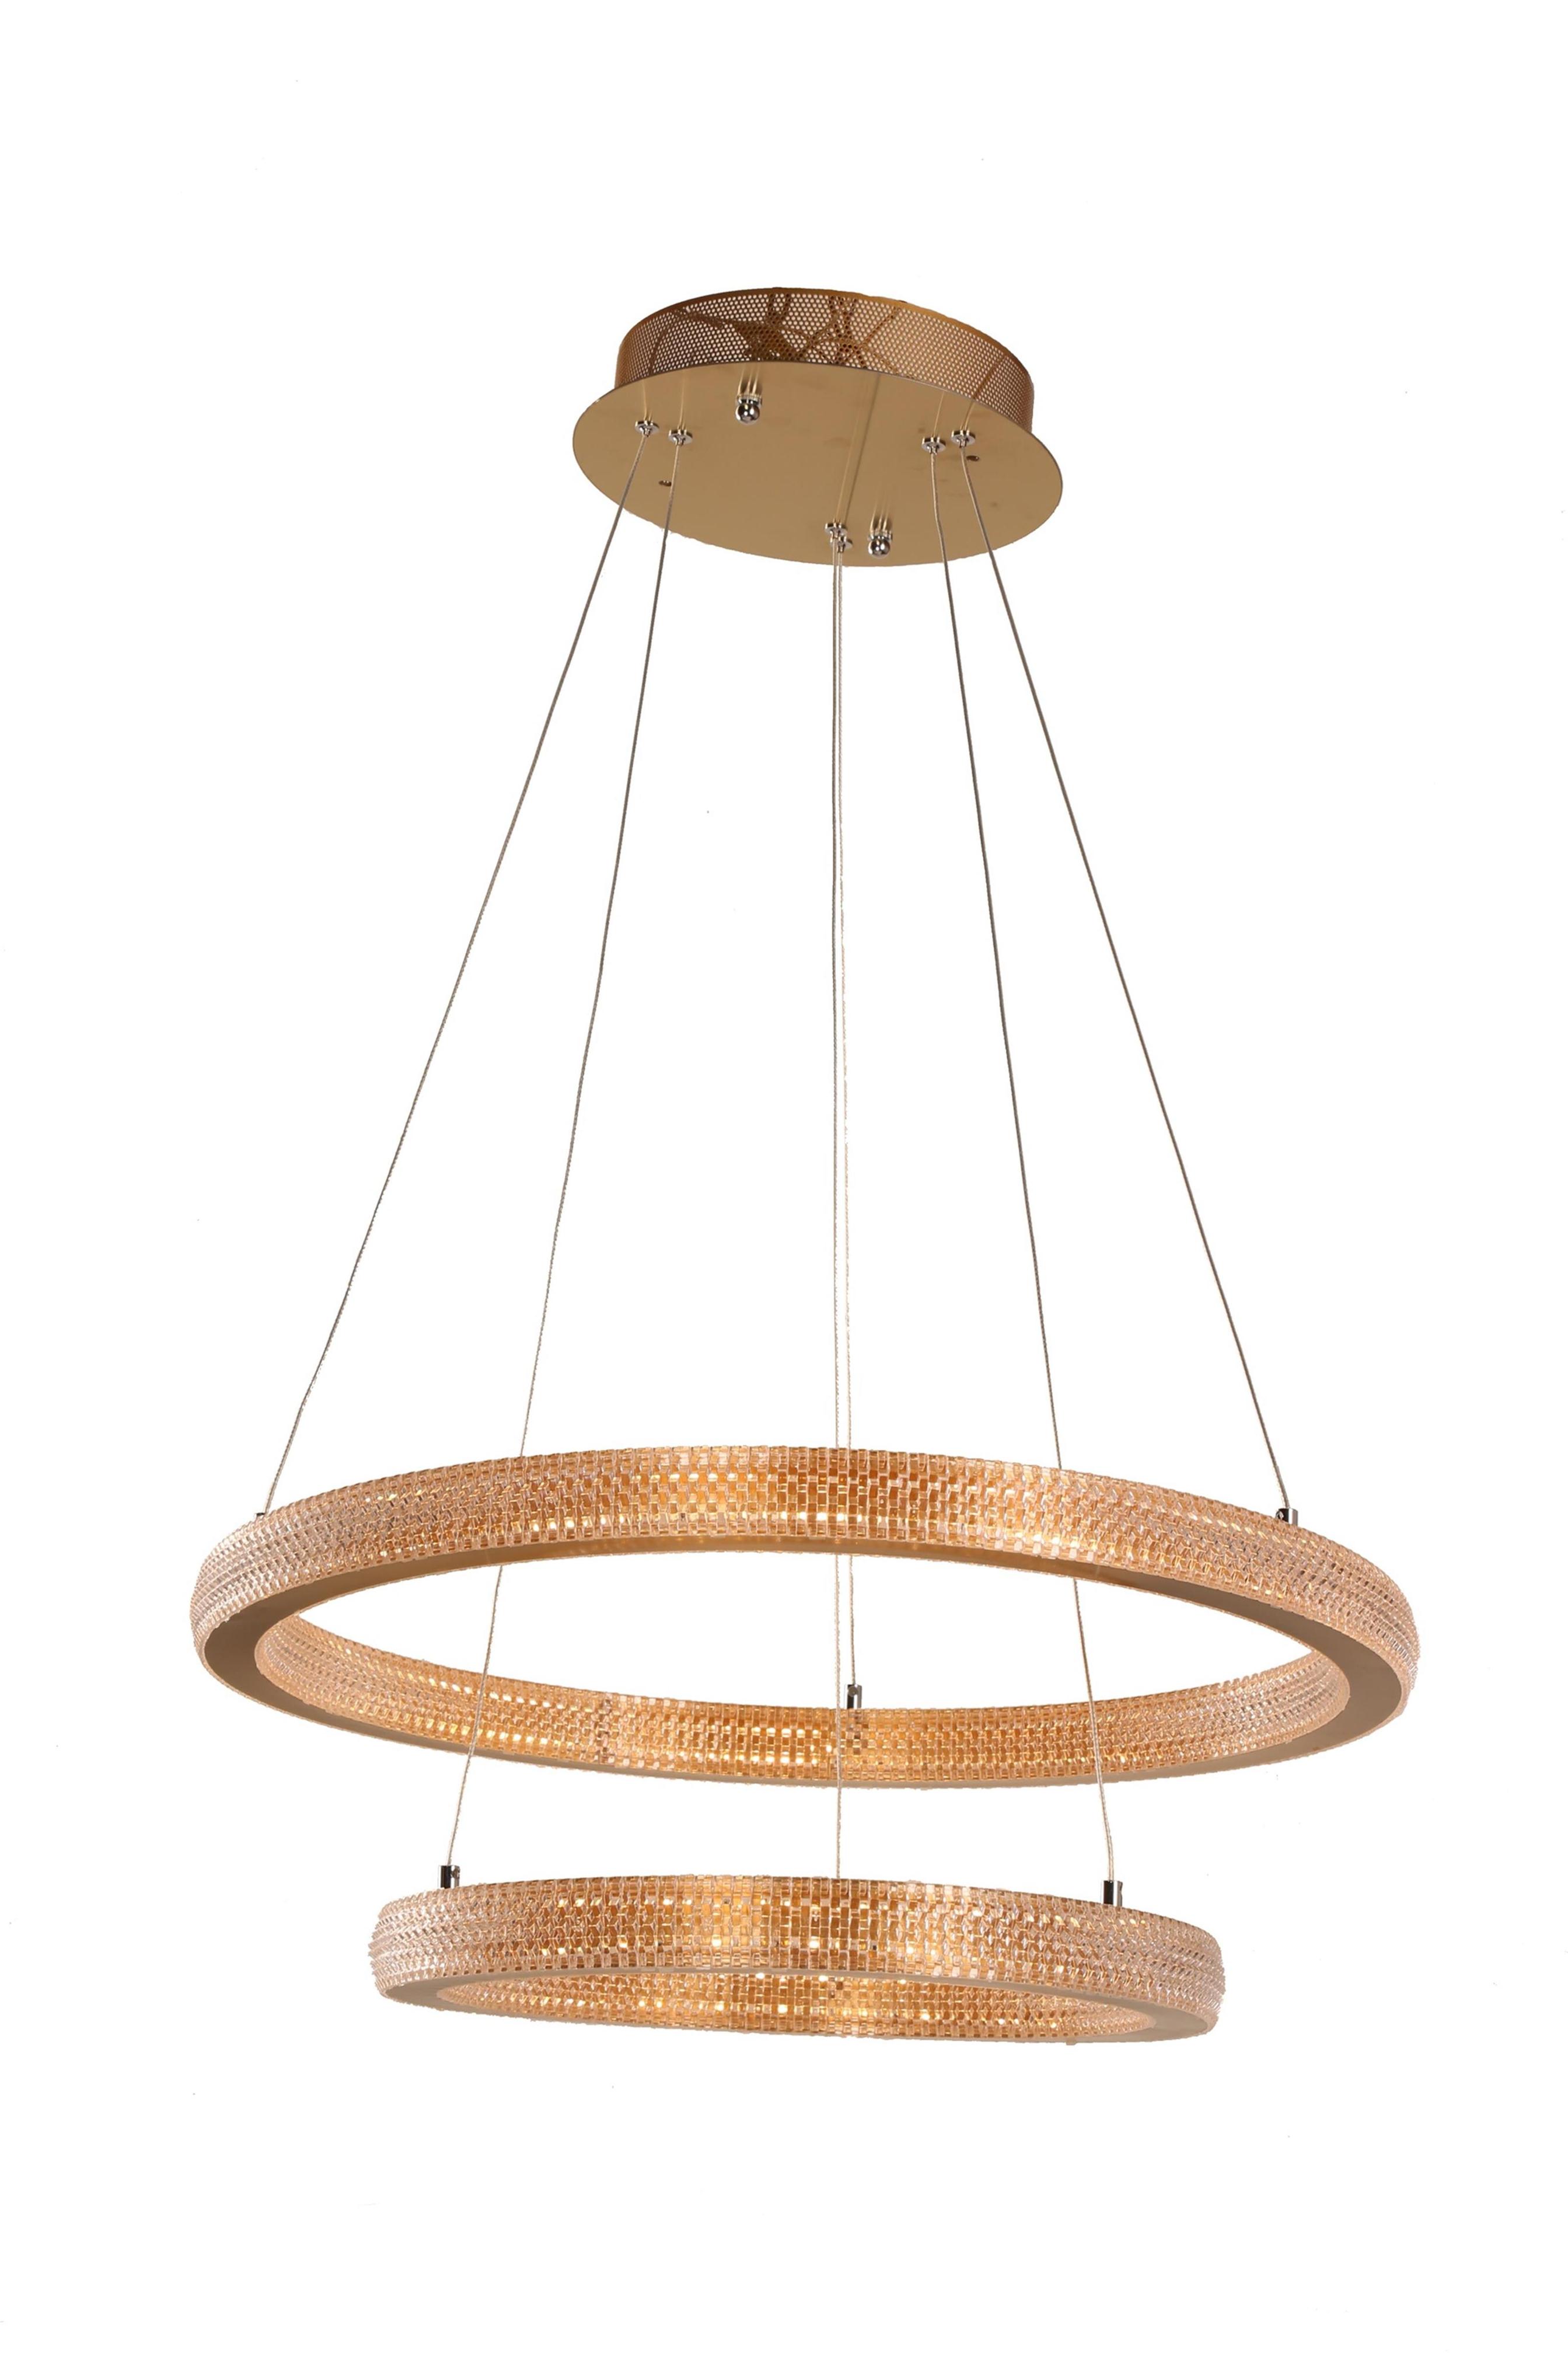 Saintly lamp hanging pendant lights for-sale for dining room-2